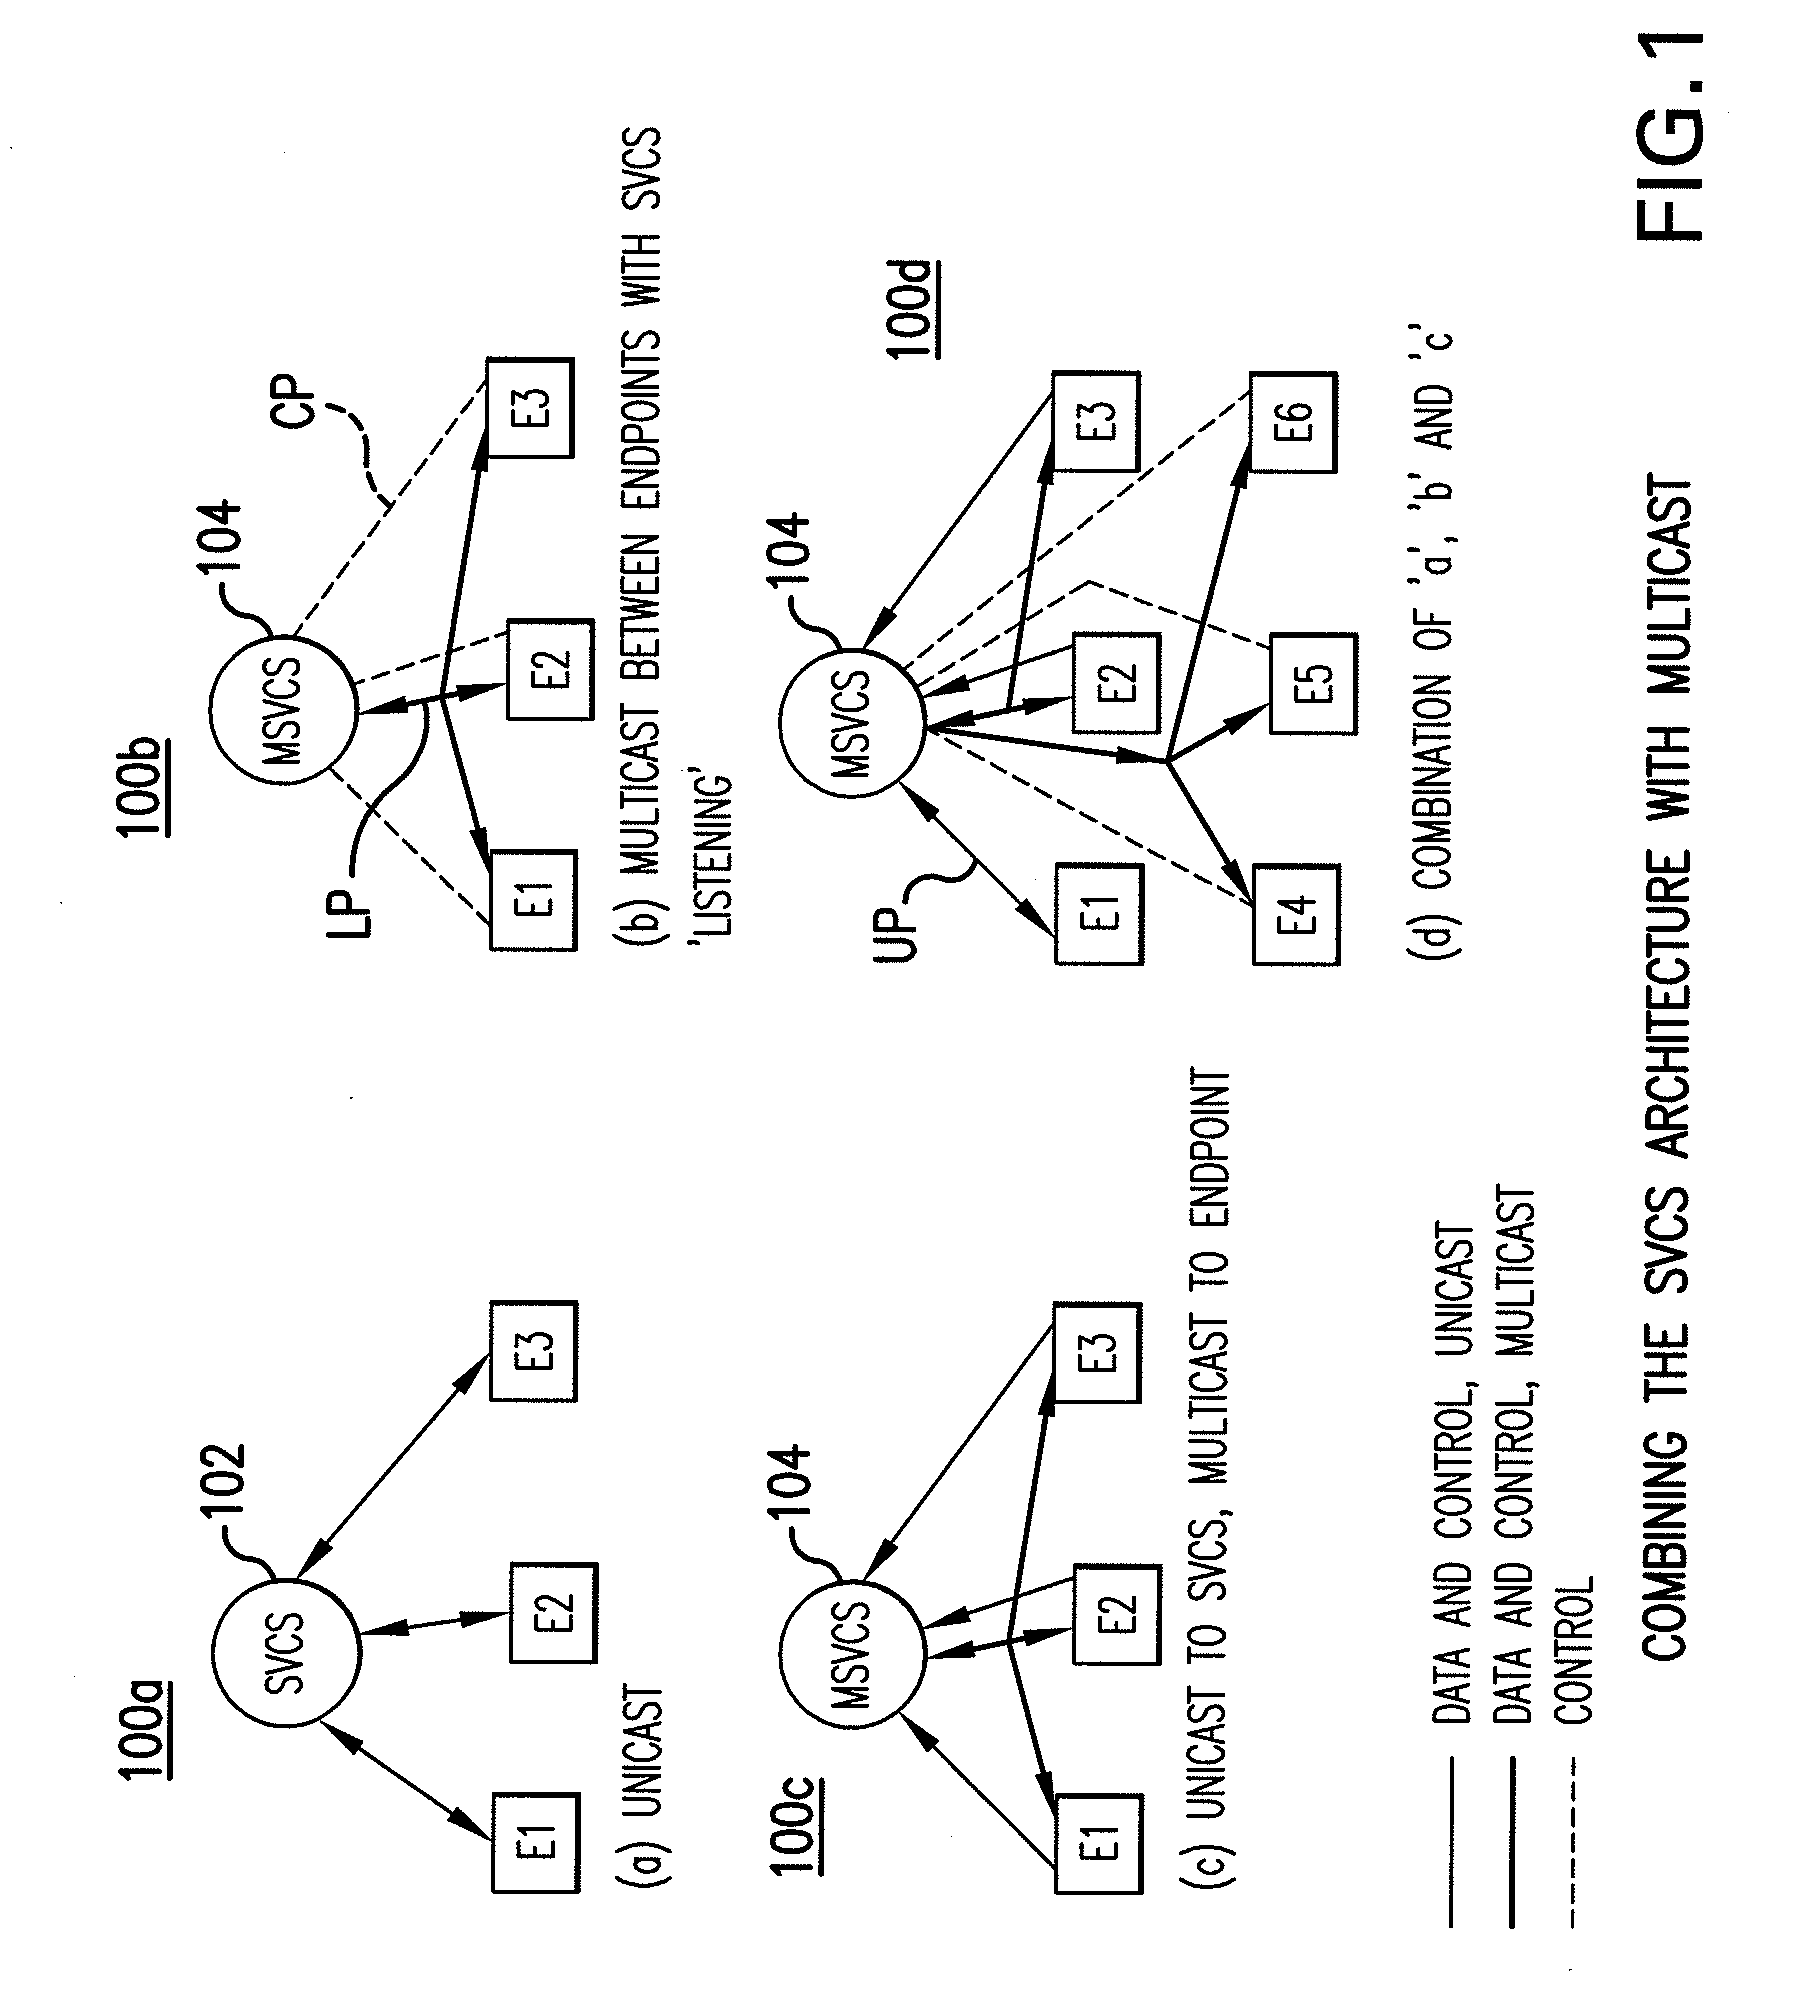 System and method for multipoint conferencing with scalable video coding servers and multicast